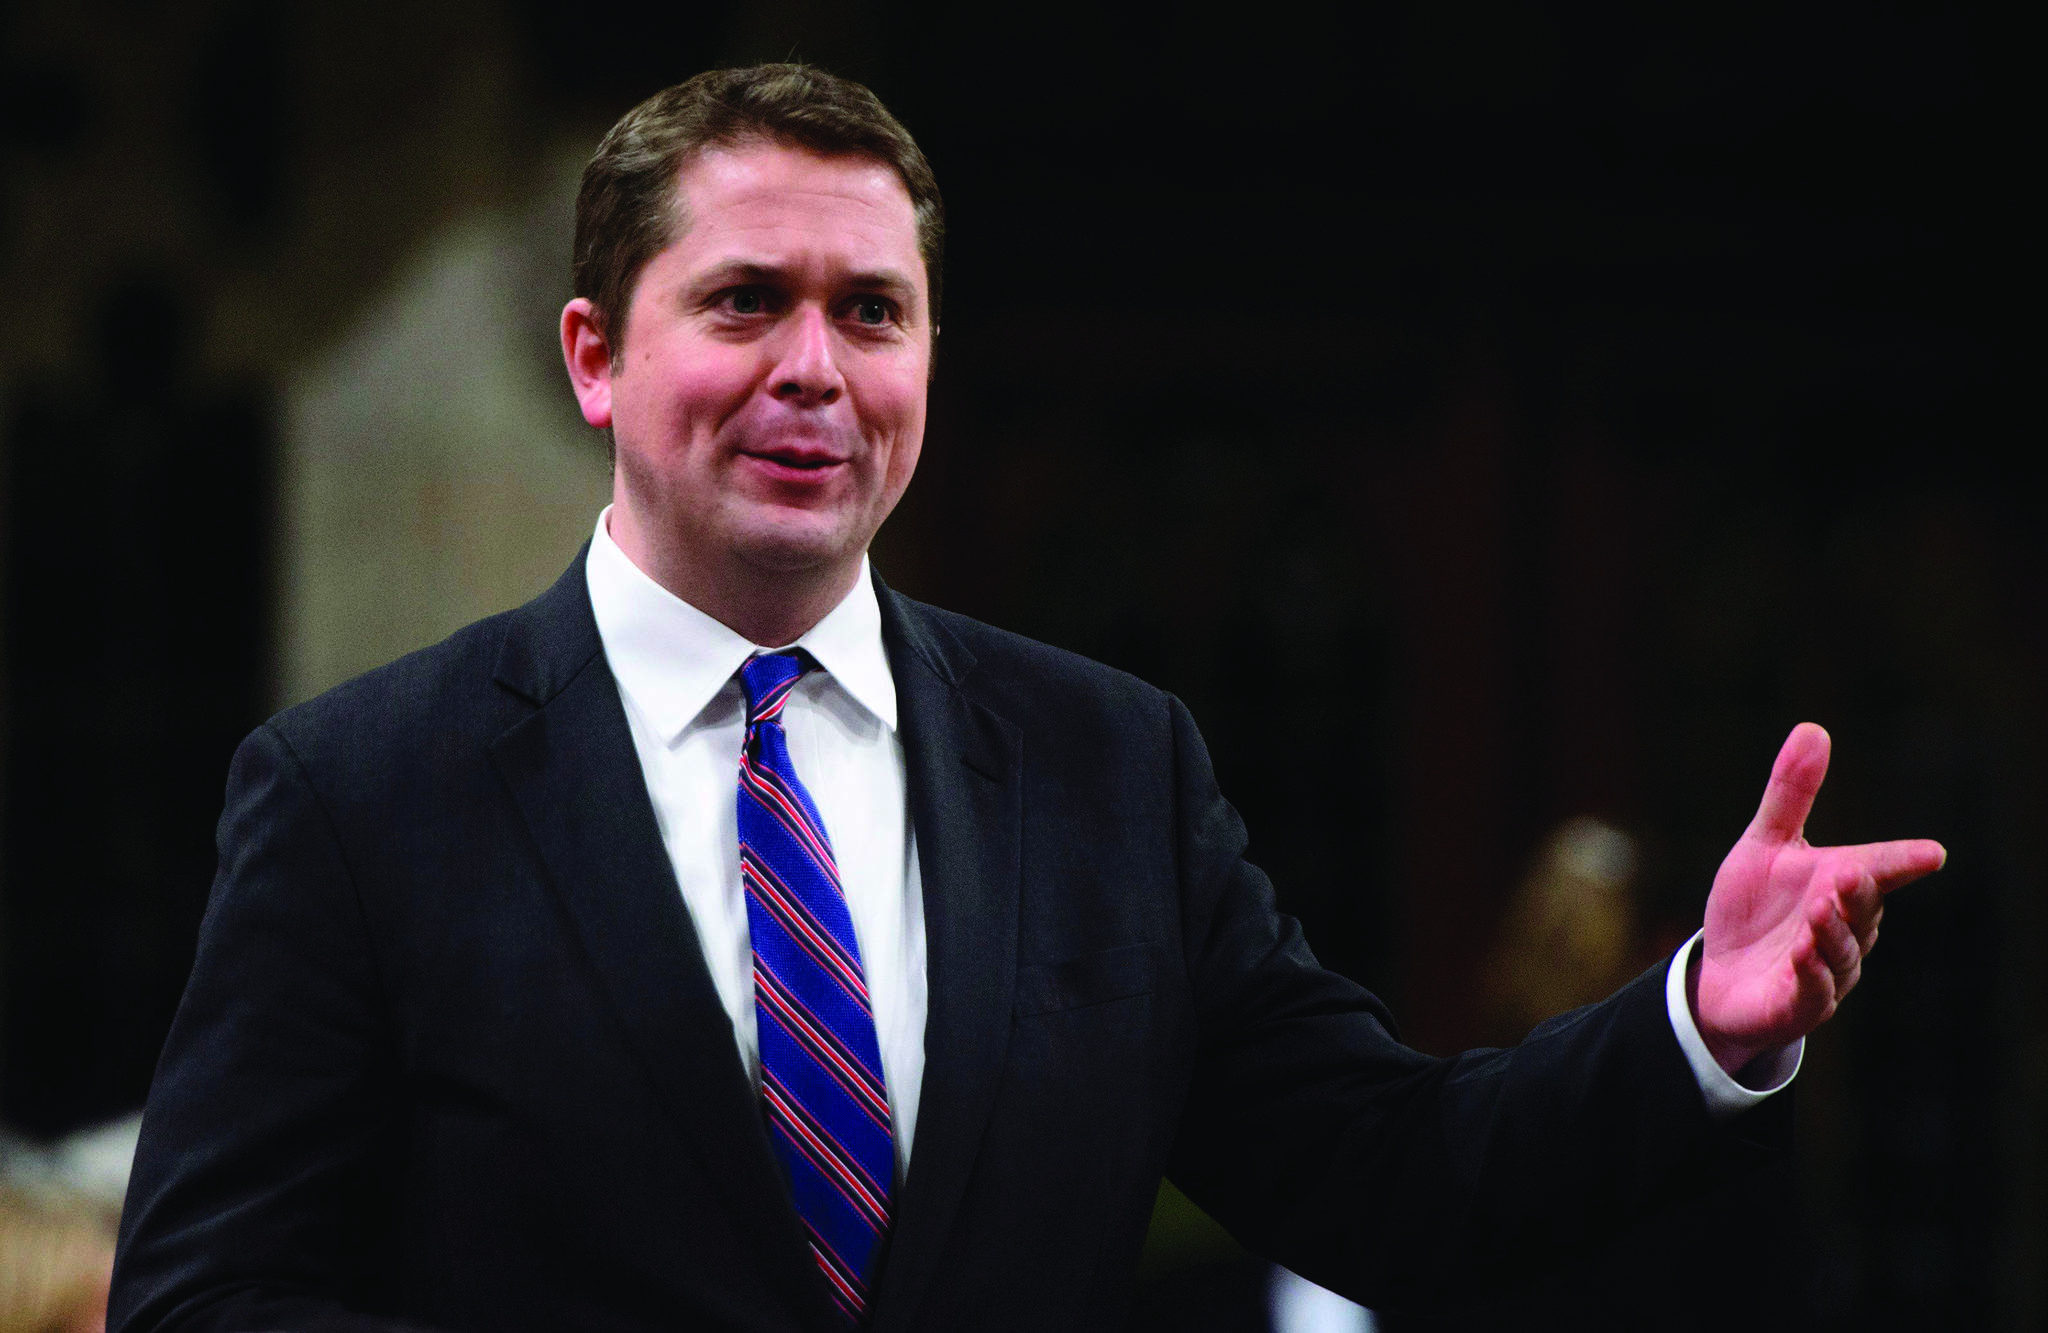 Conservative Leader Andrew Scheer stands during question period ion the House of Commons on Parliament Hill in Ottawa on Wednesday, March 28, 2018. THE CANADIAN PRESS/Sean Kilpatrick